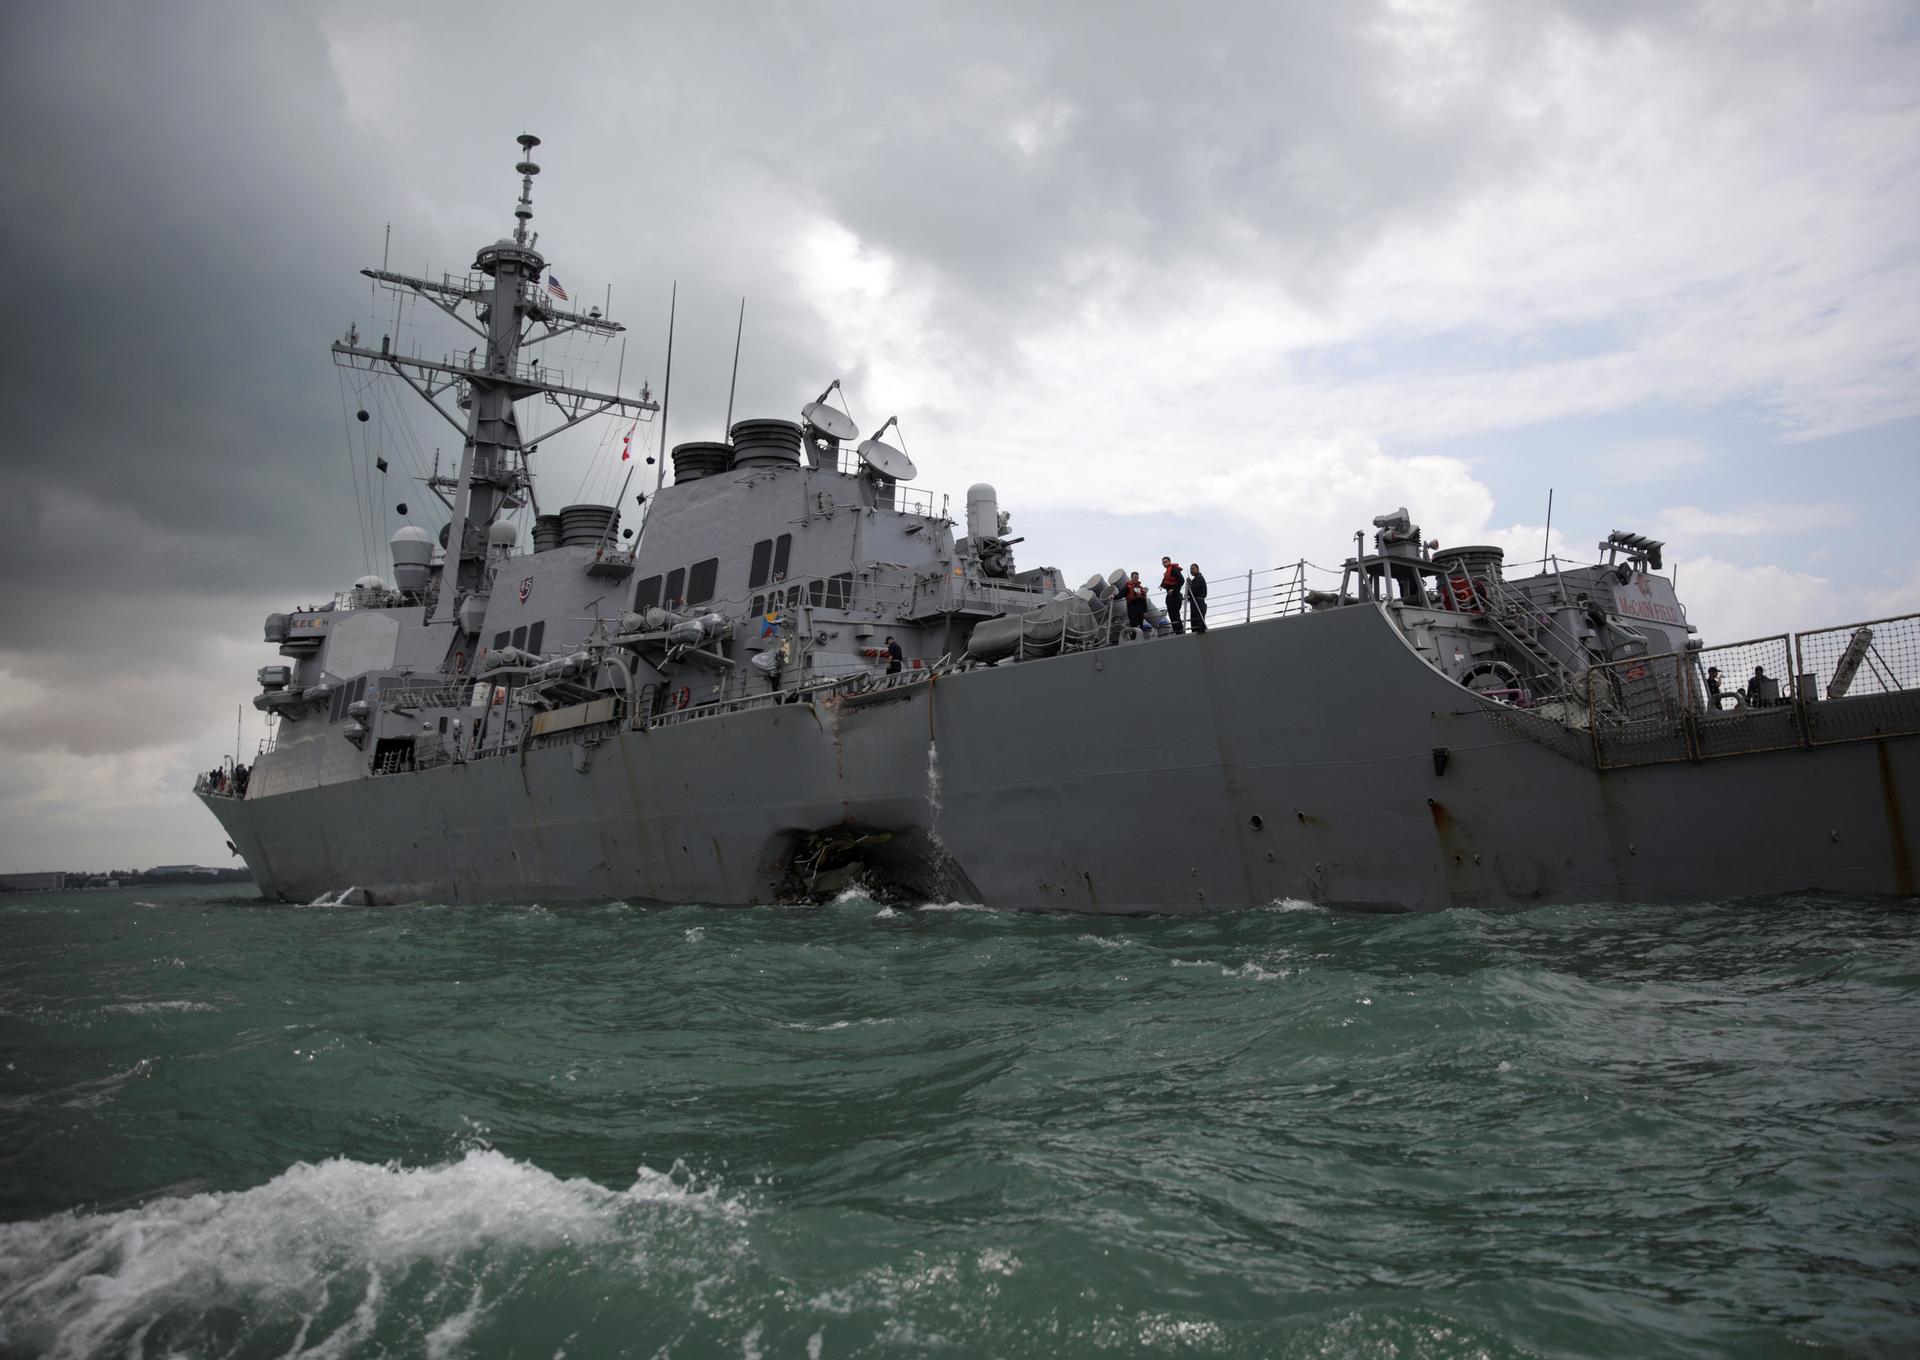 A gash can be seen in the destroyer, the USS John S. McCain, after a collision with civilian ship on Monday 